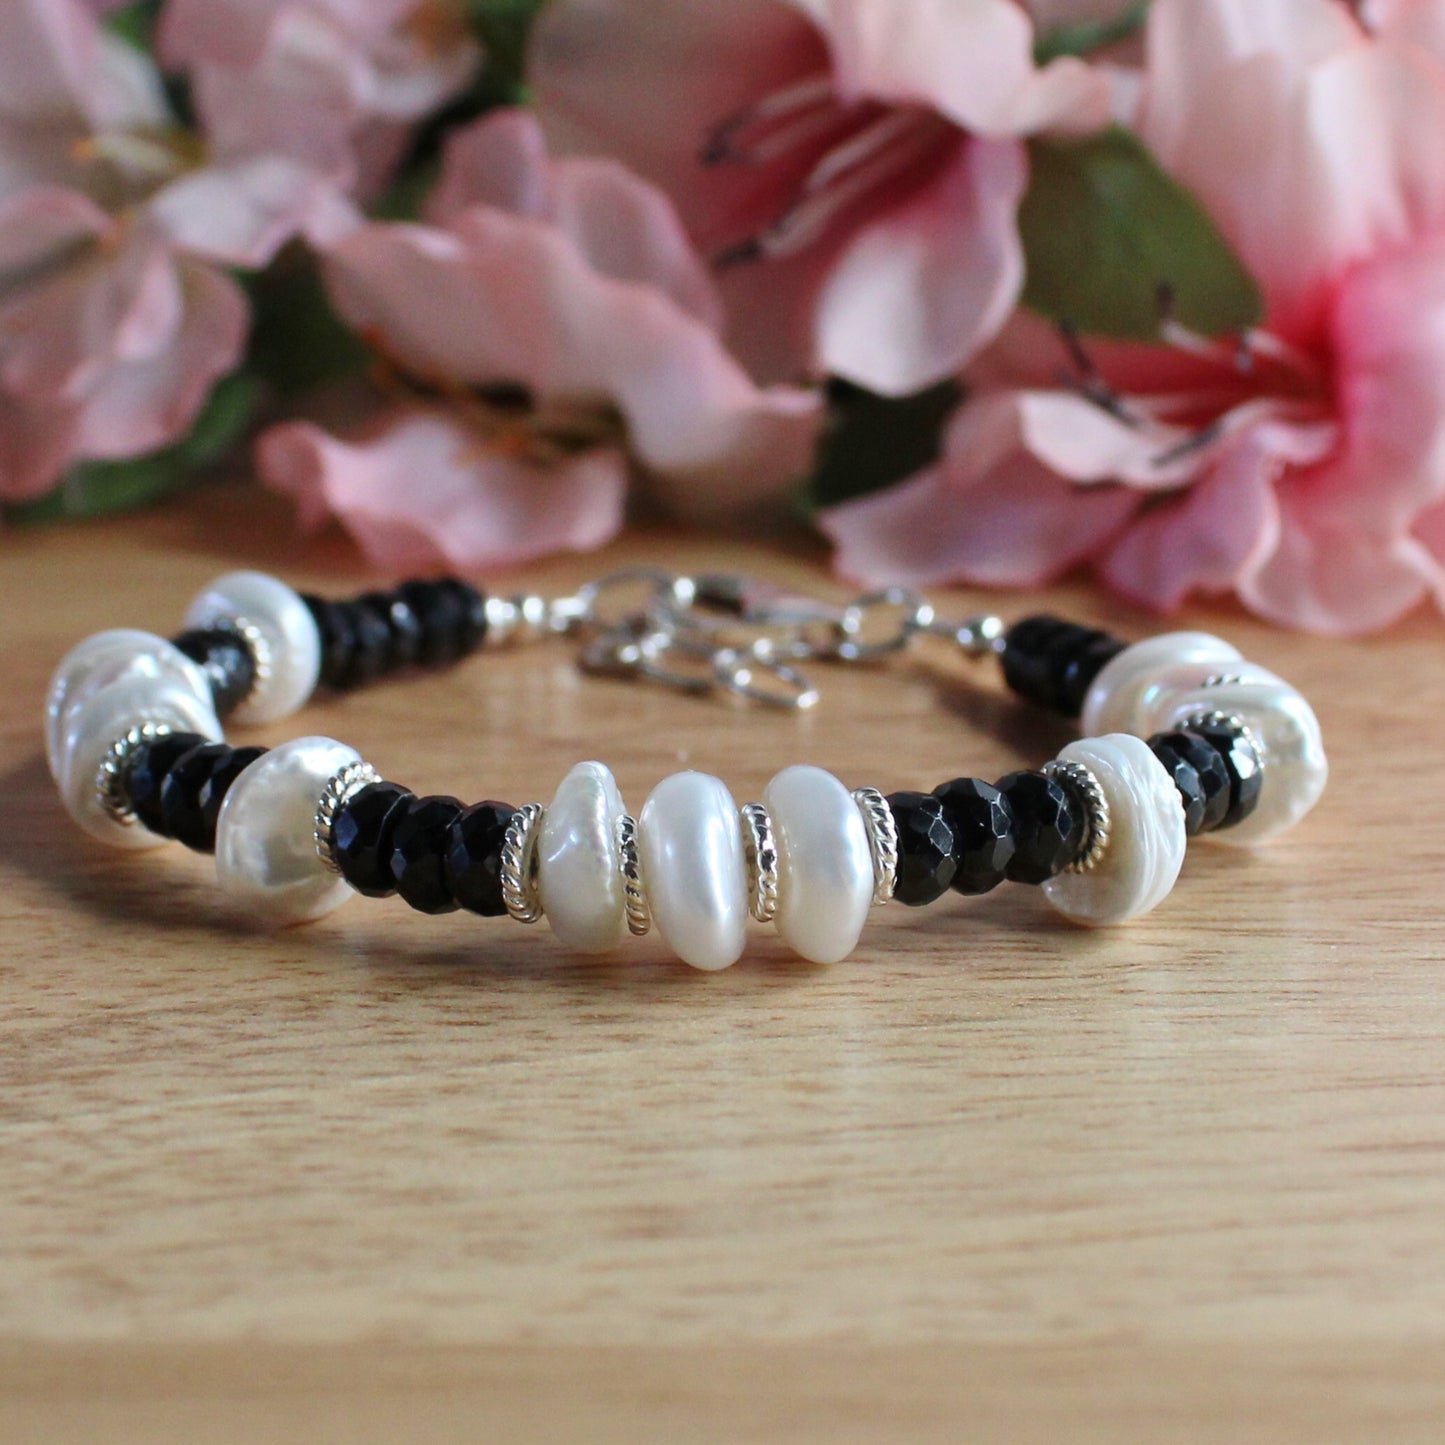 handcrafted black spinel and pearl bracelet. facetted black spinel rondelle gemstone beads. white keishi pearls. sterling silver accent beads, lobster clasp, extender chain 